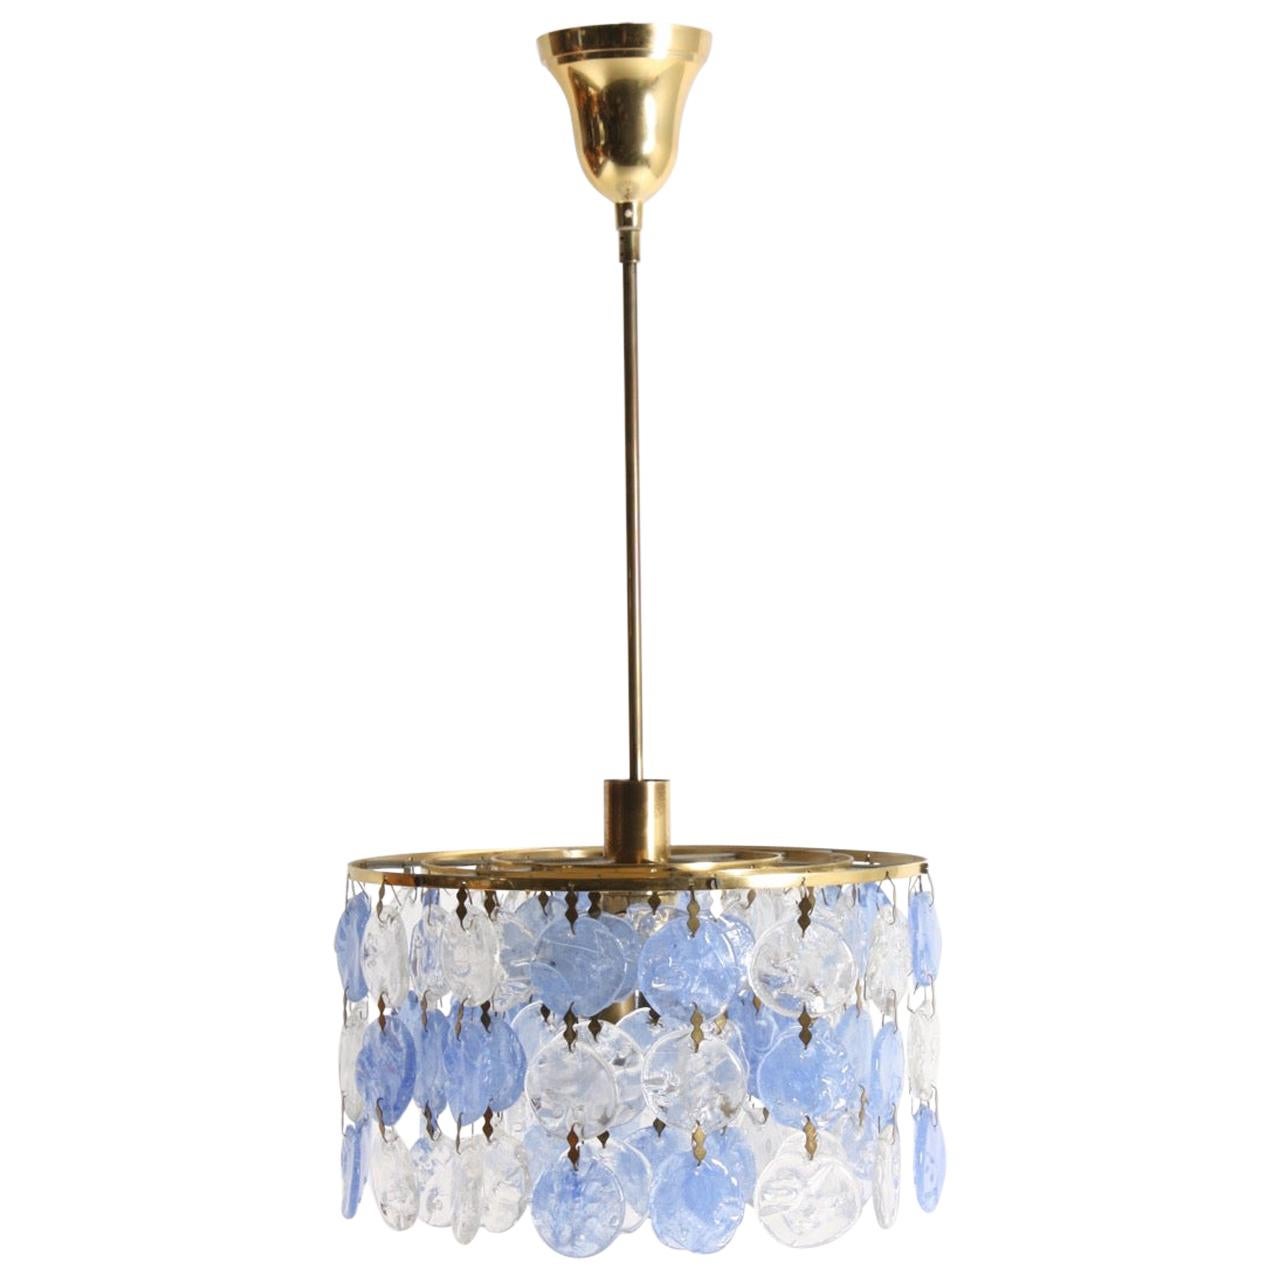 Midcentury Italian Chandelier in Brass and Colored Glass, 1960s